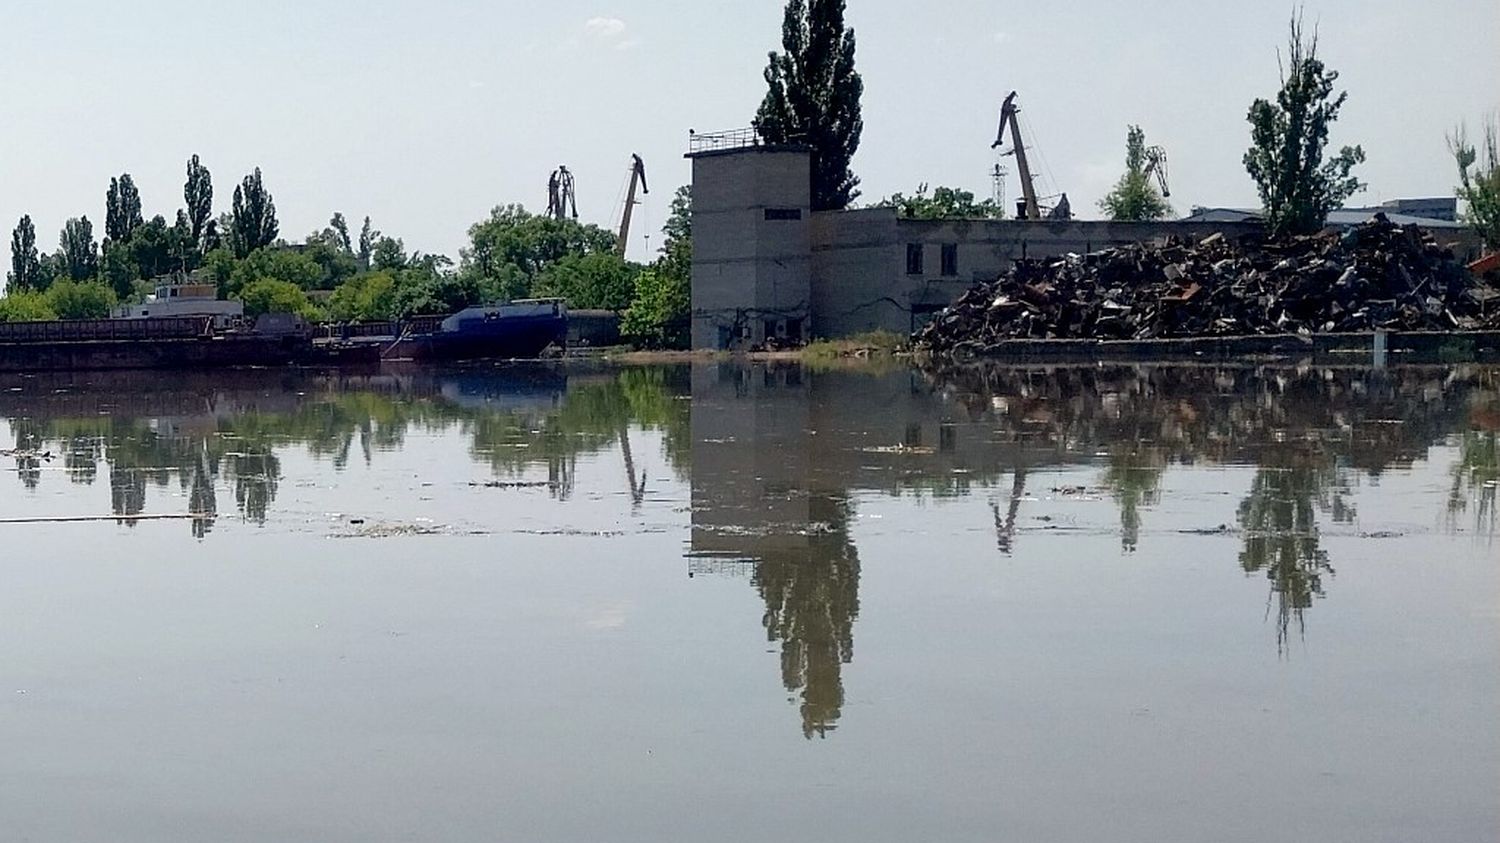 War in Ukraine: who can benefit from the destruction of the Kakhovka dam?
